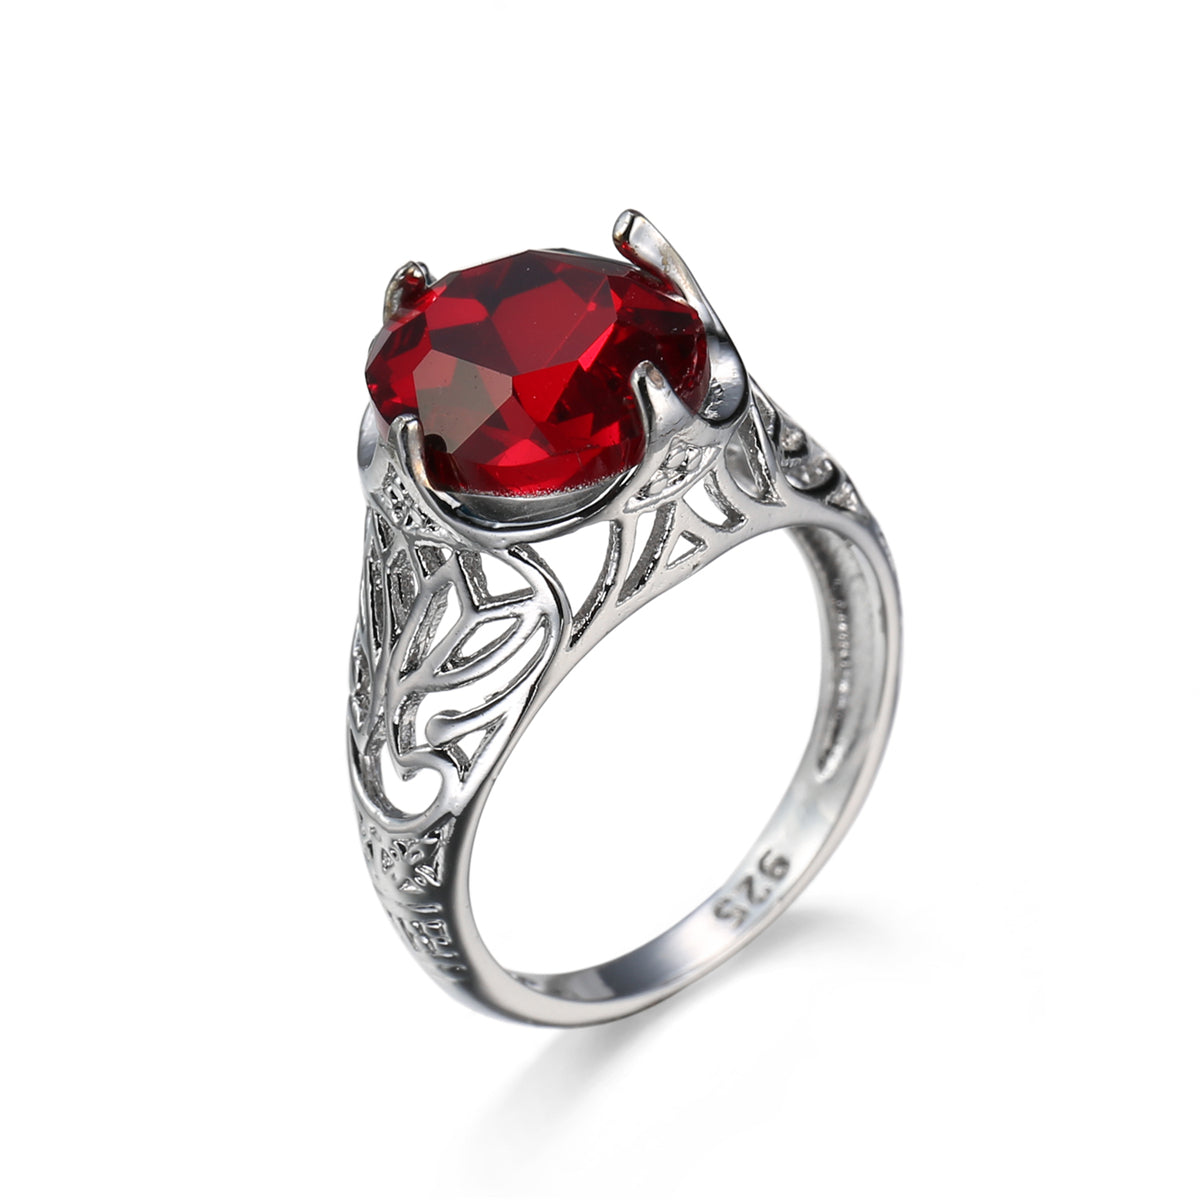 Red Crystal & Silver-Plated Filigree Ring